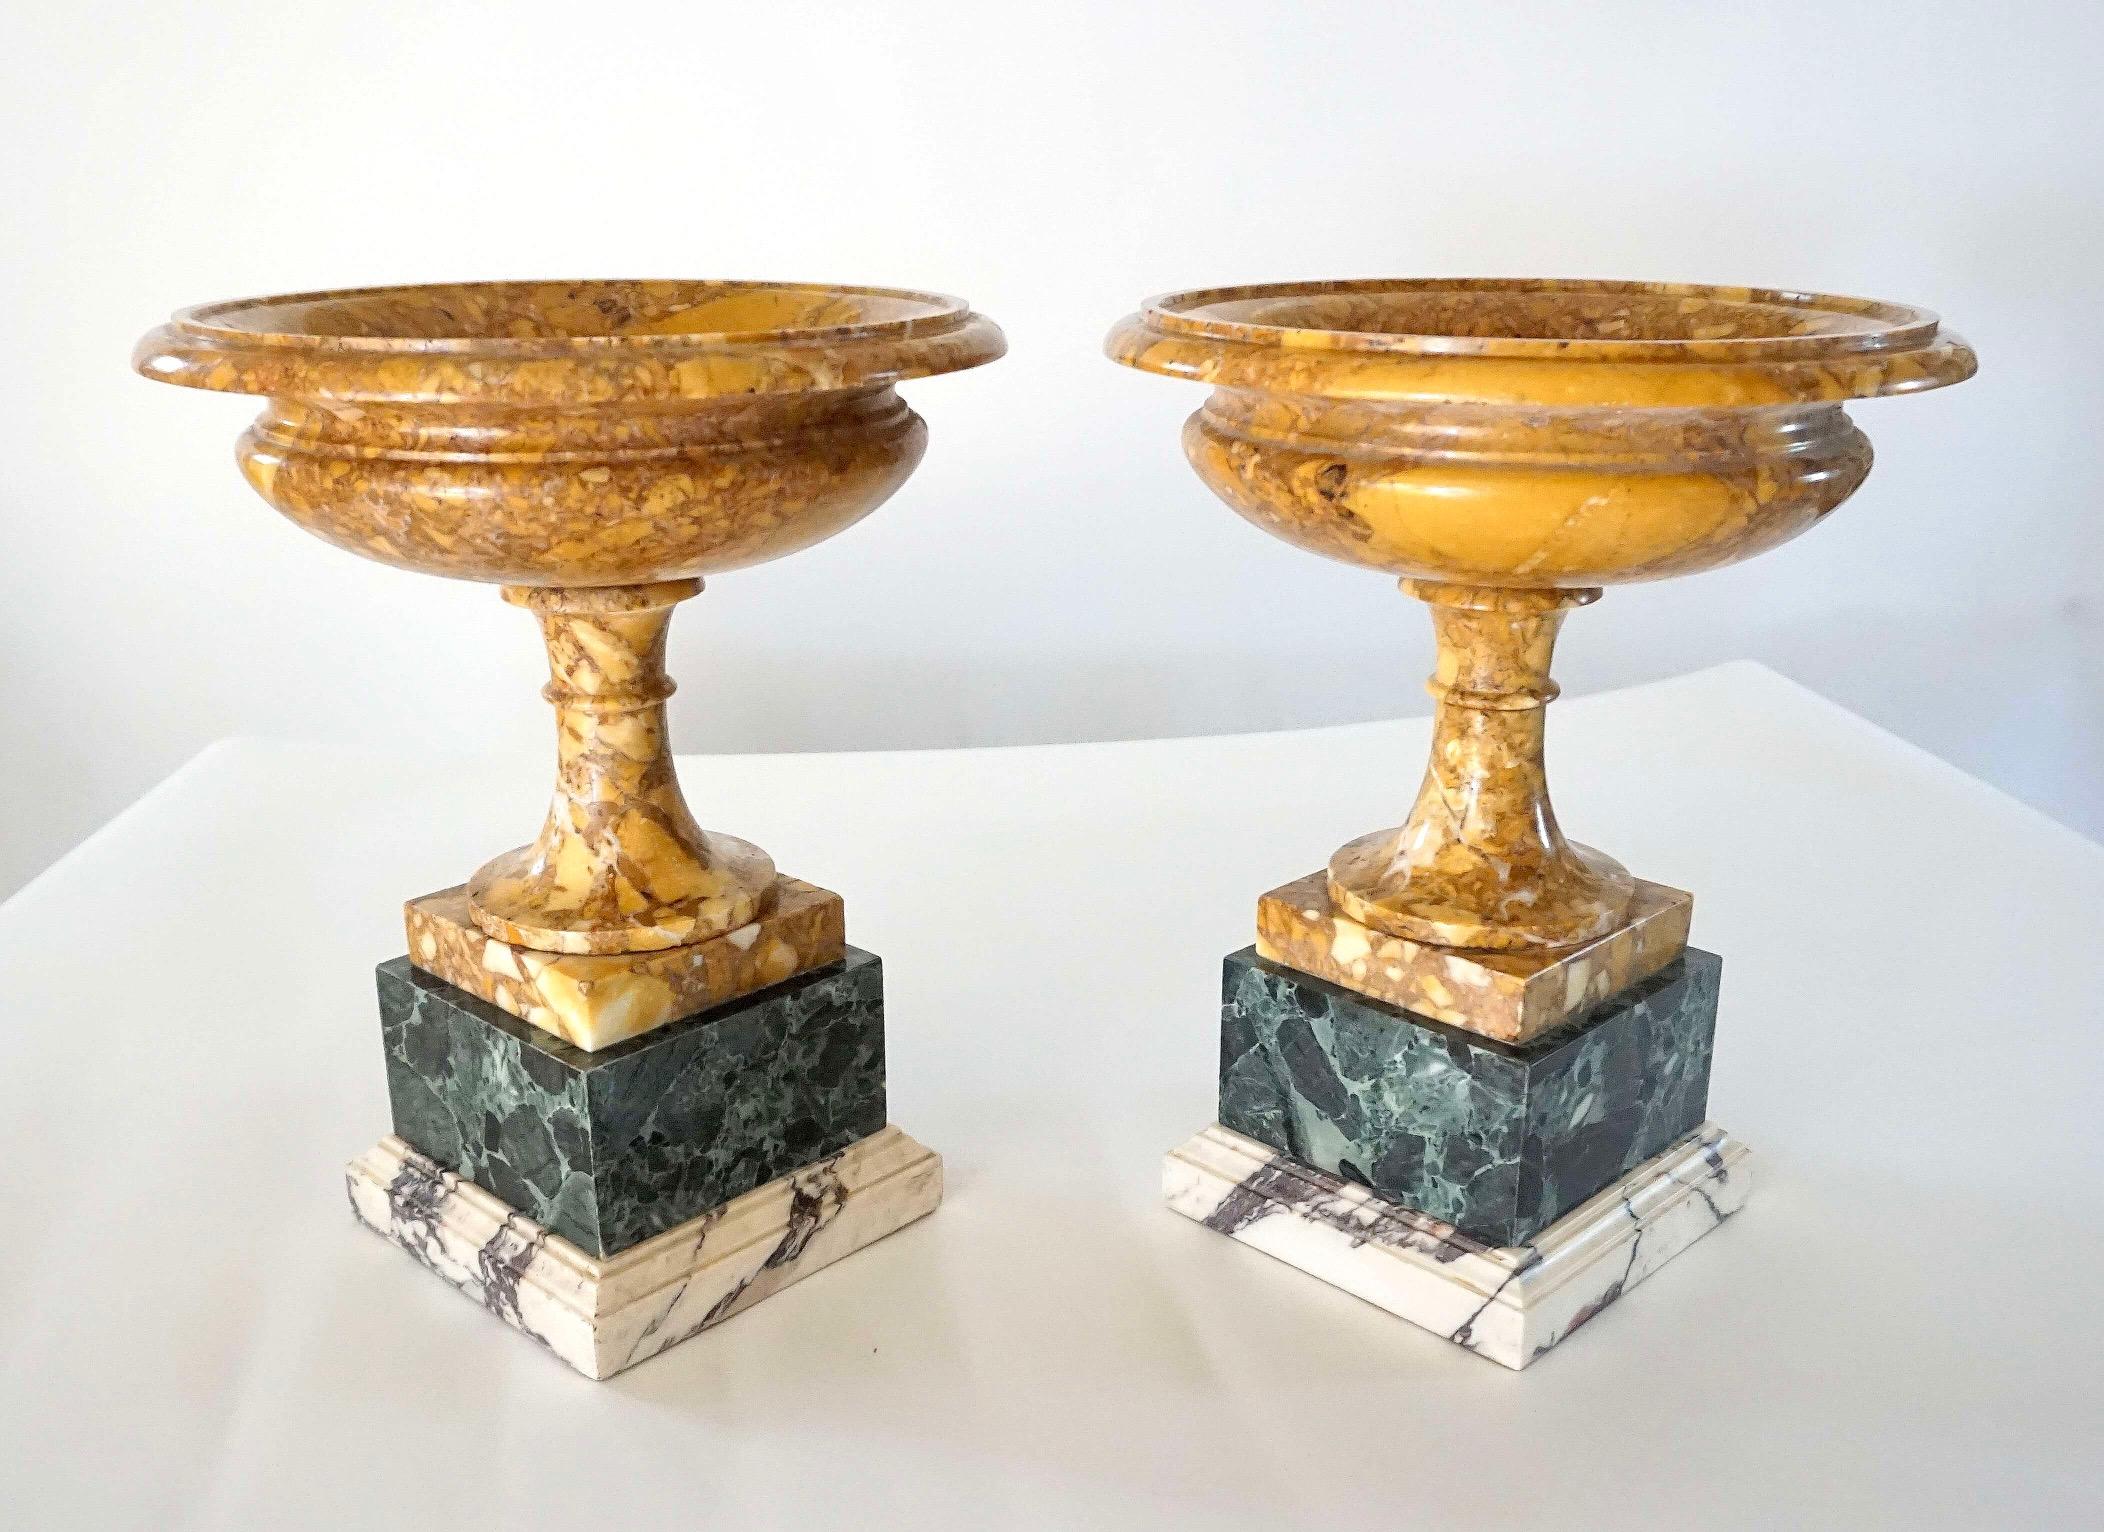 Pair of 19th Century Italian Neoclassical Tazze in Polychrome Marbles For Sale 4